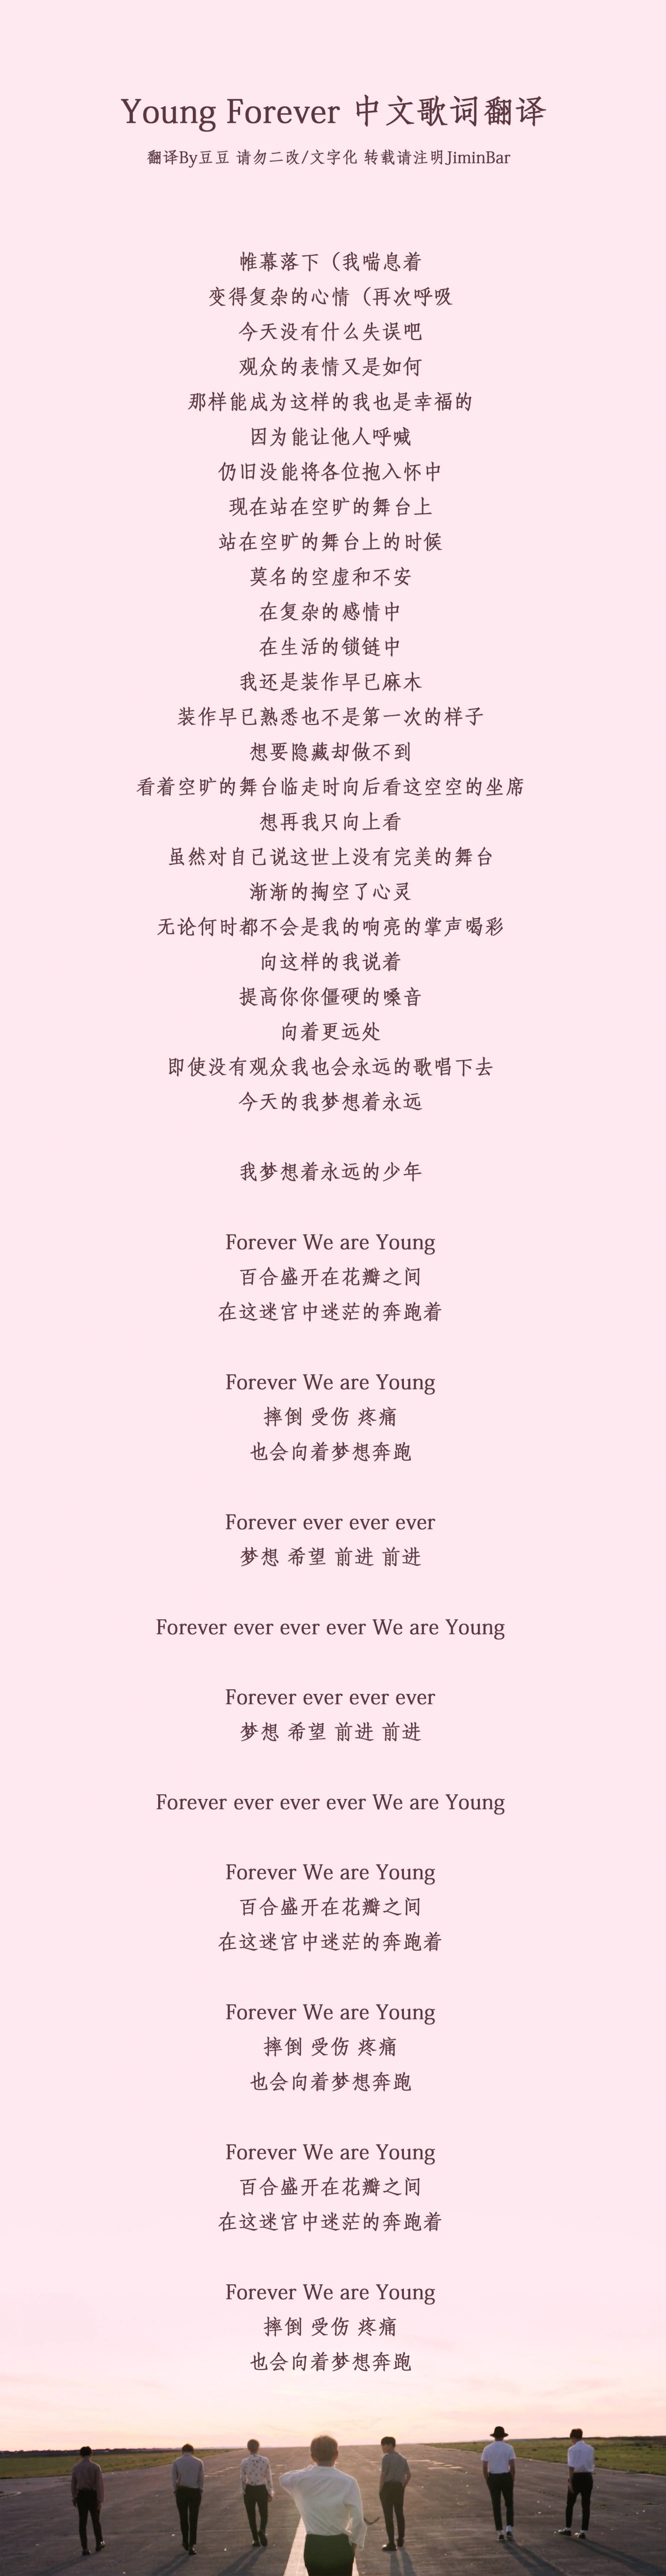 Forever young 歌词